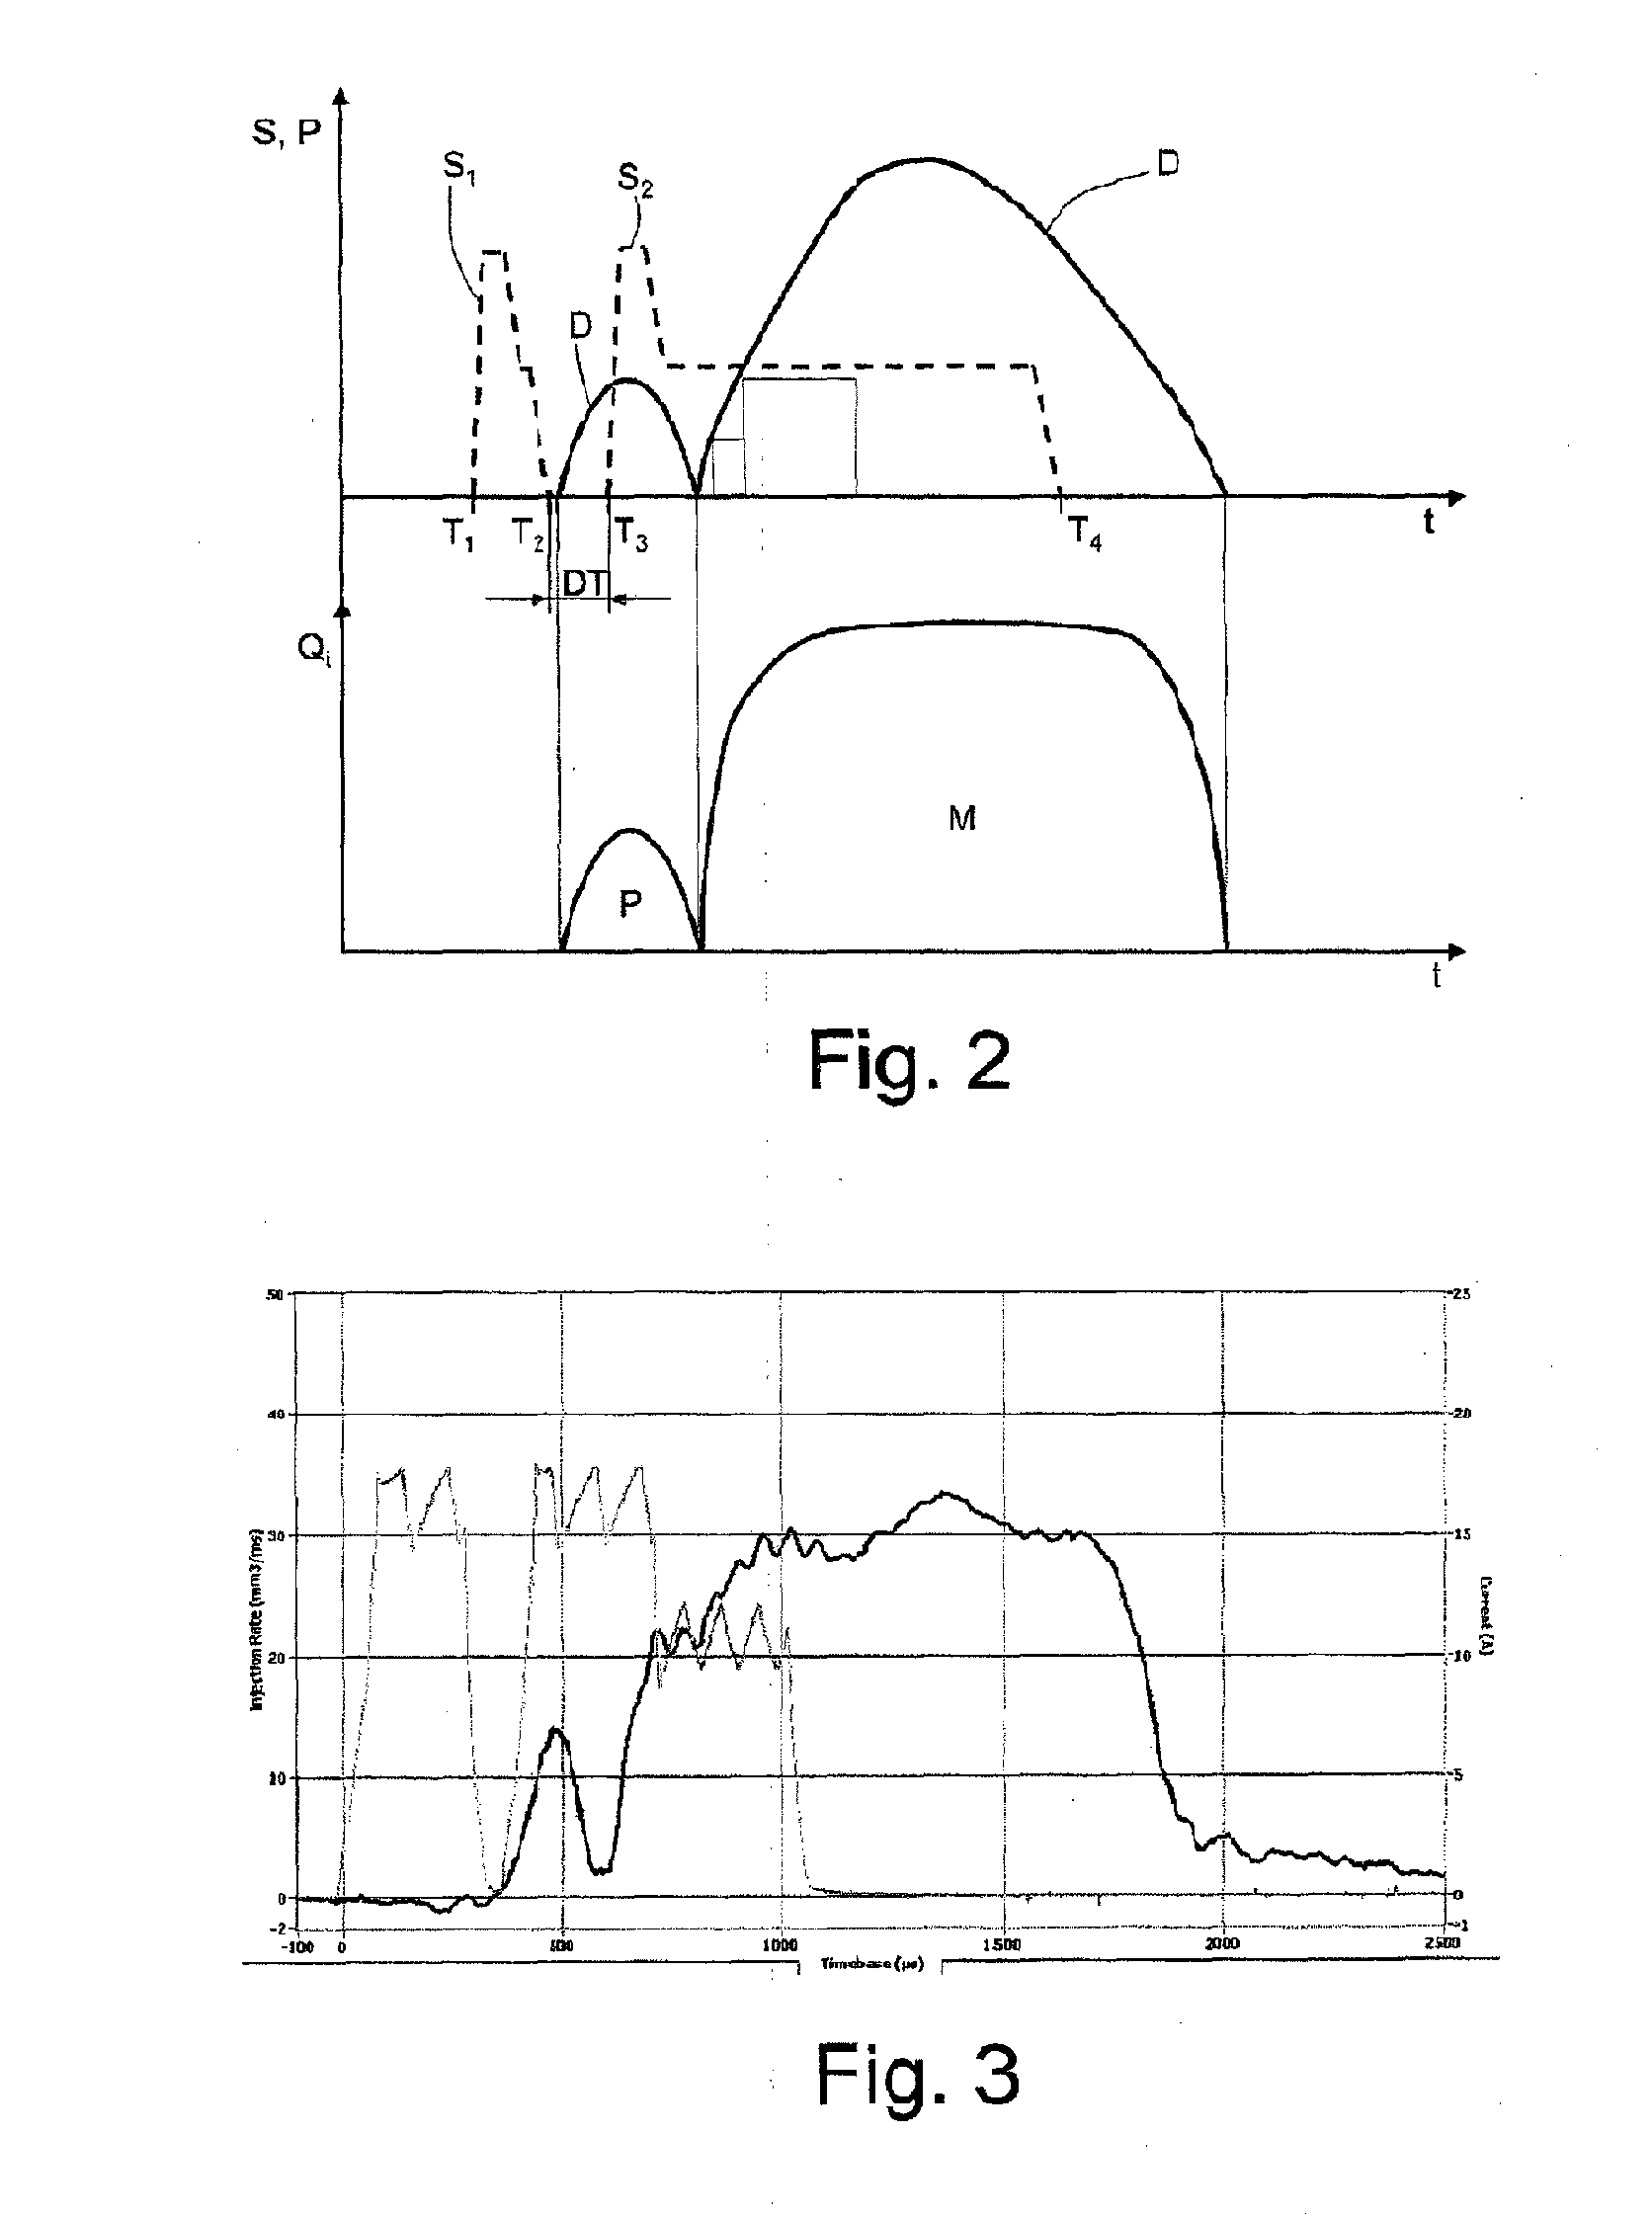 Fuel injection rate shaping in an internal combustion engine